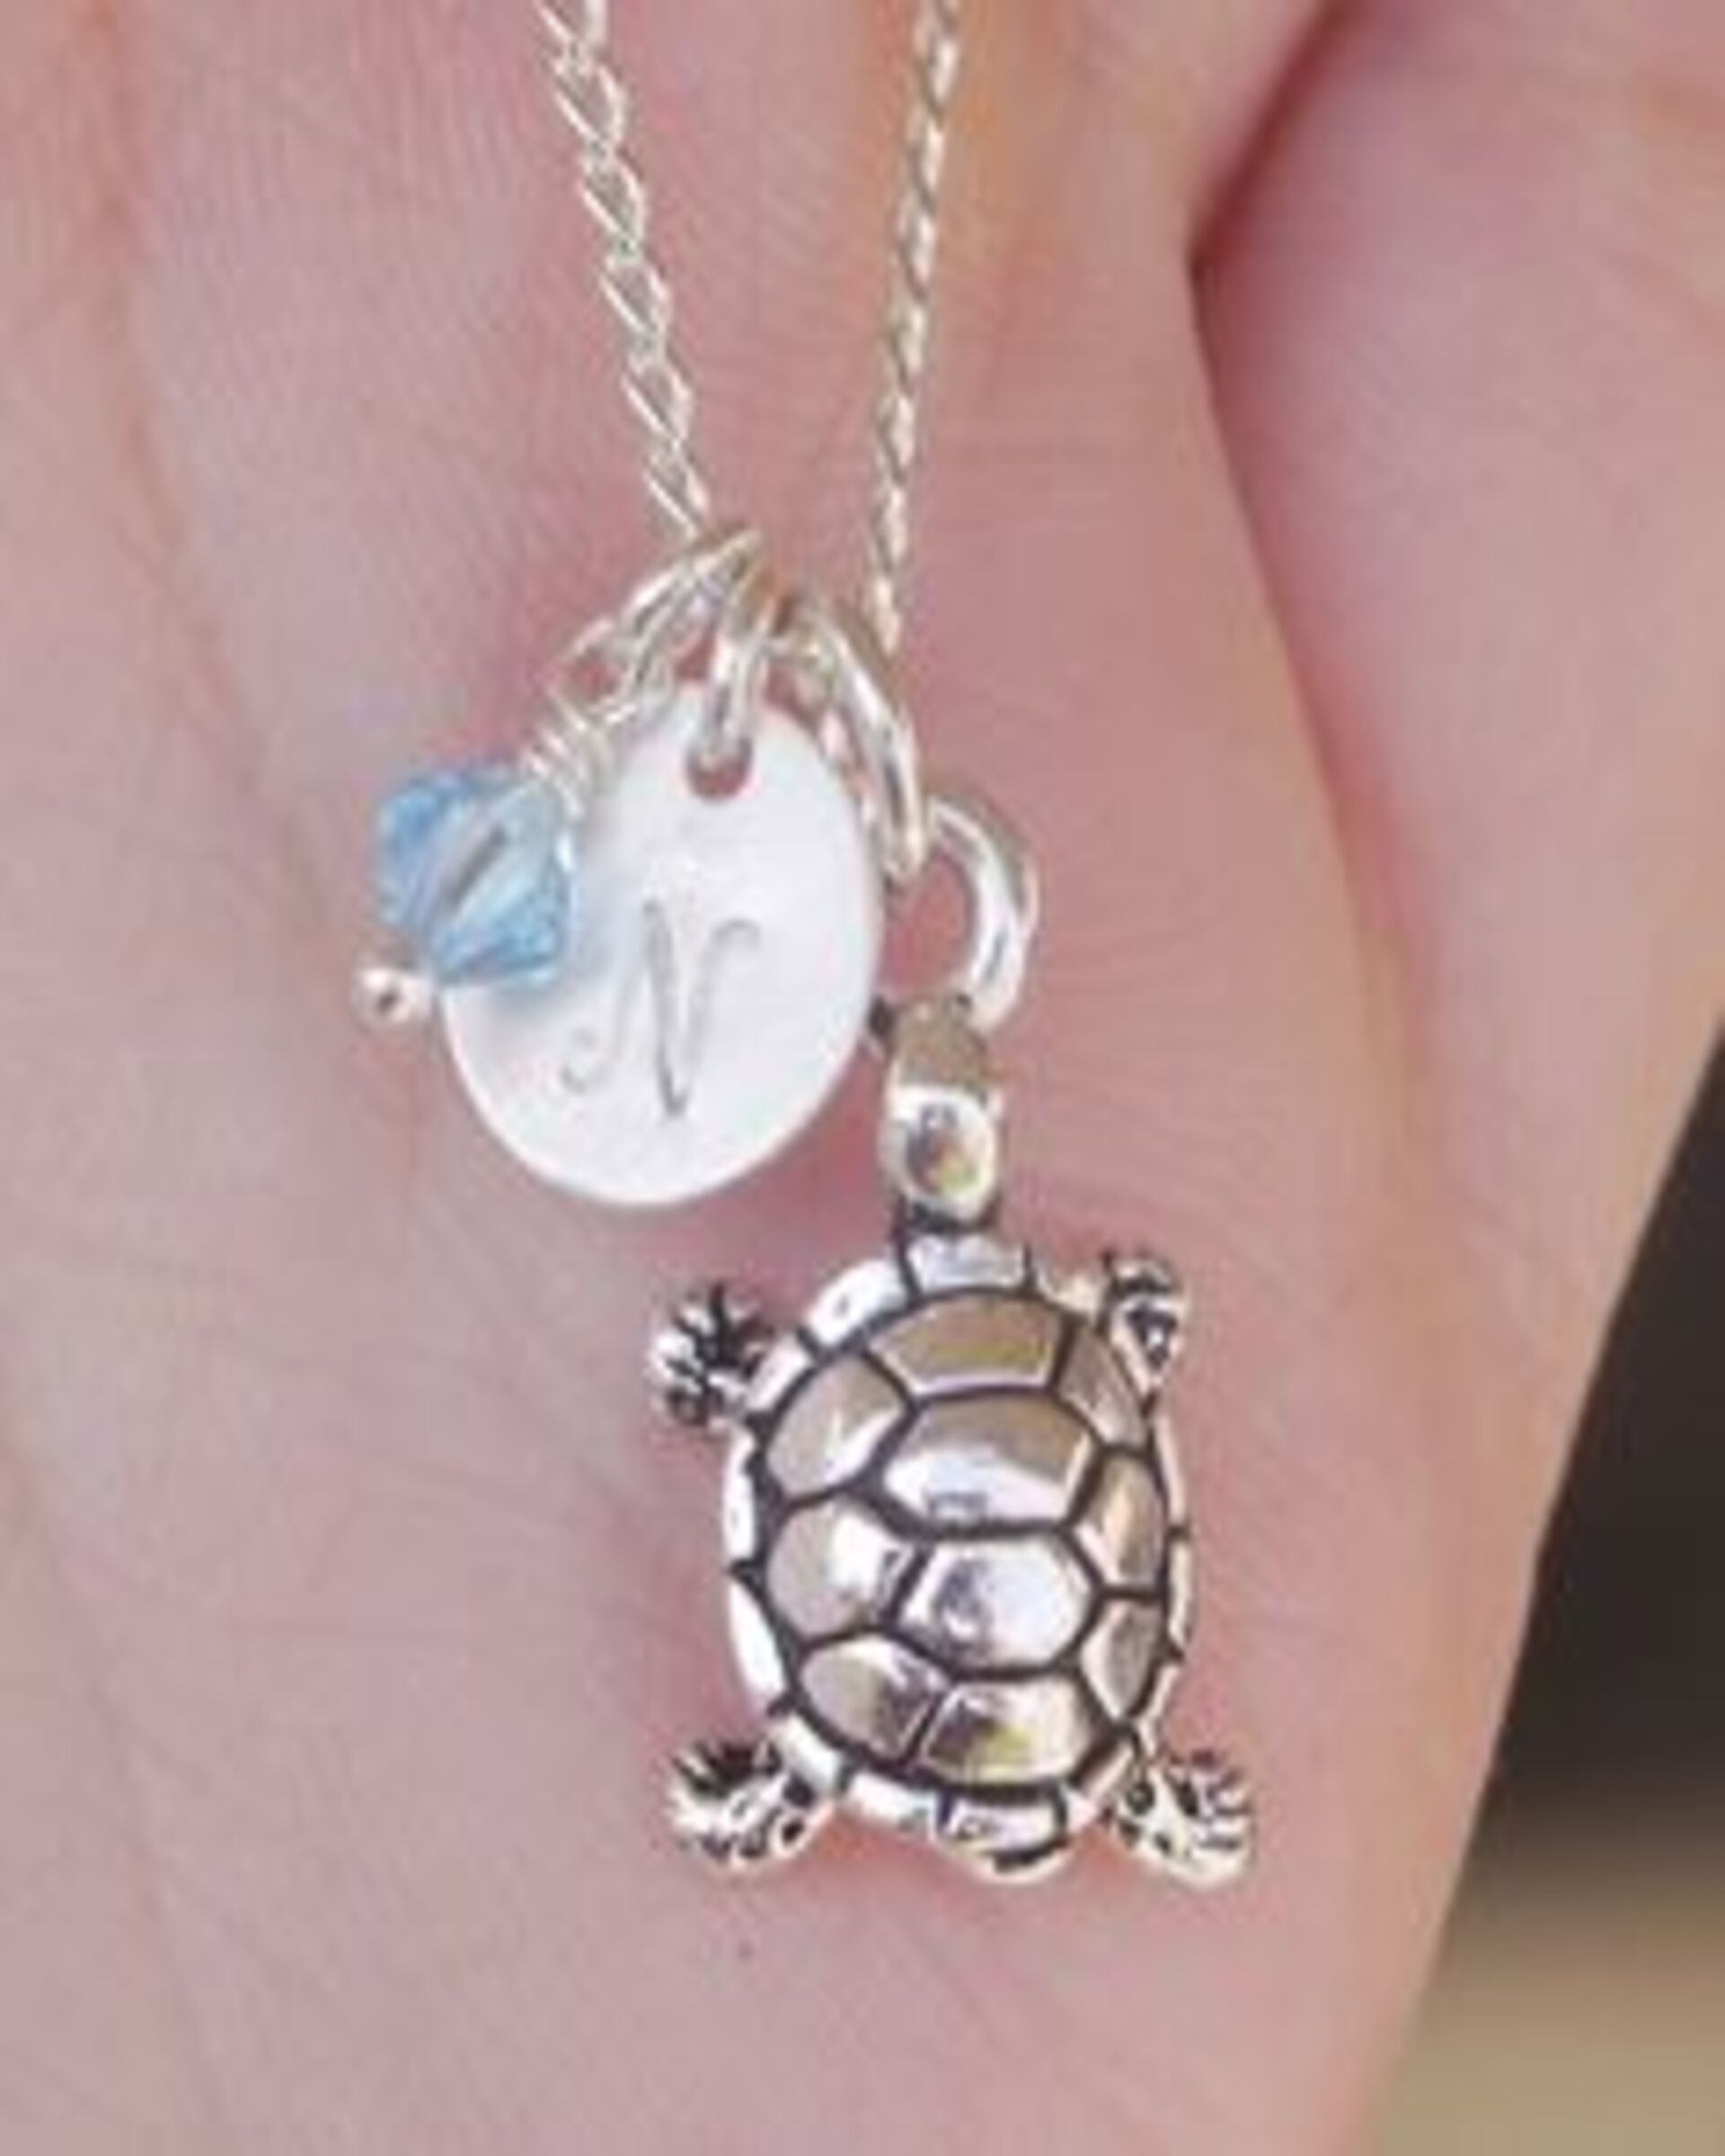 A tortoise necklace with the initial "N" | Source: Flickr